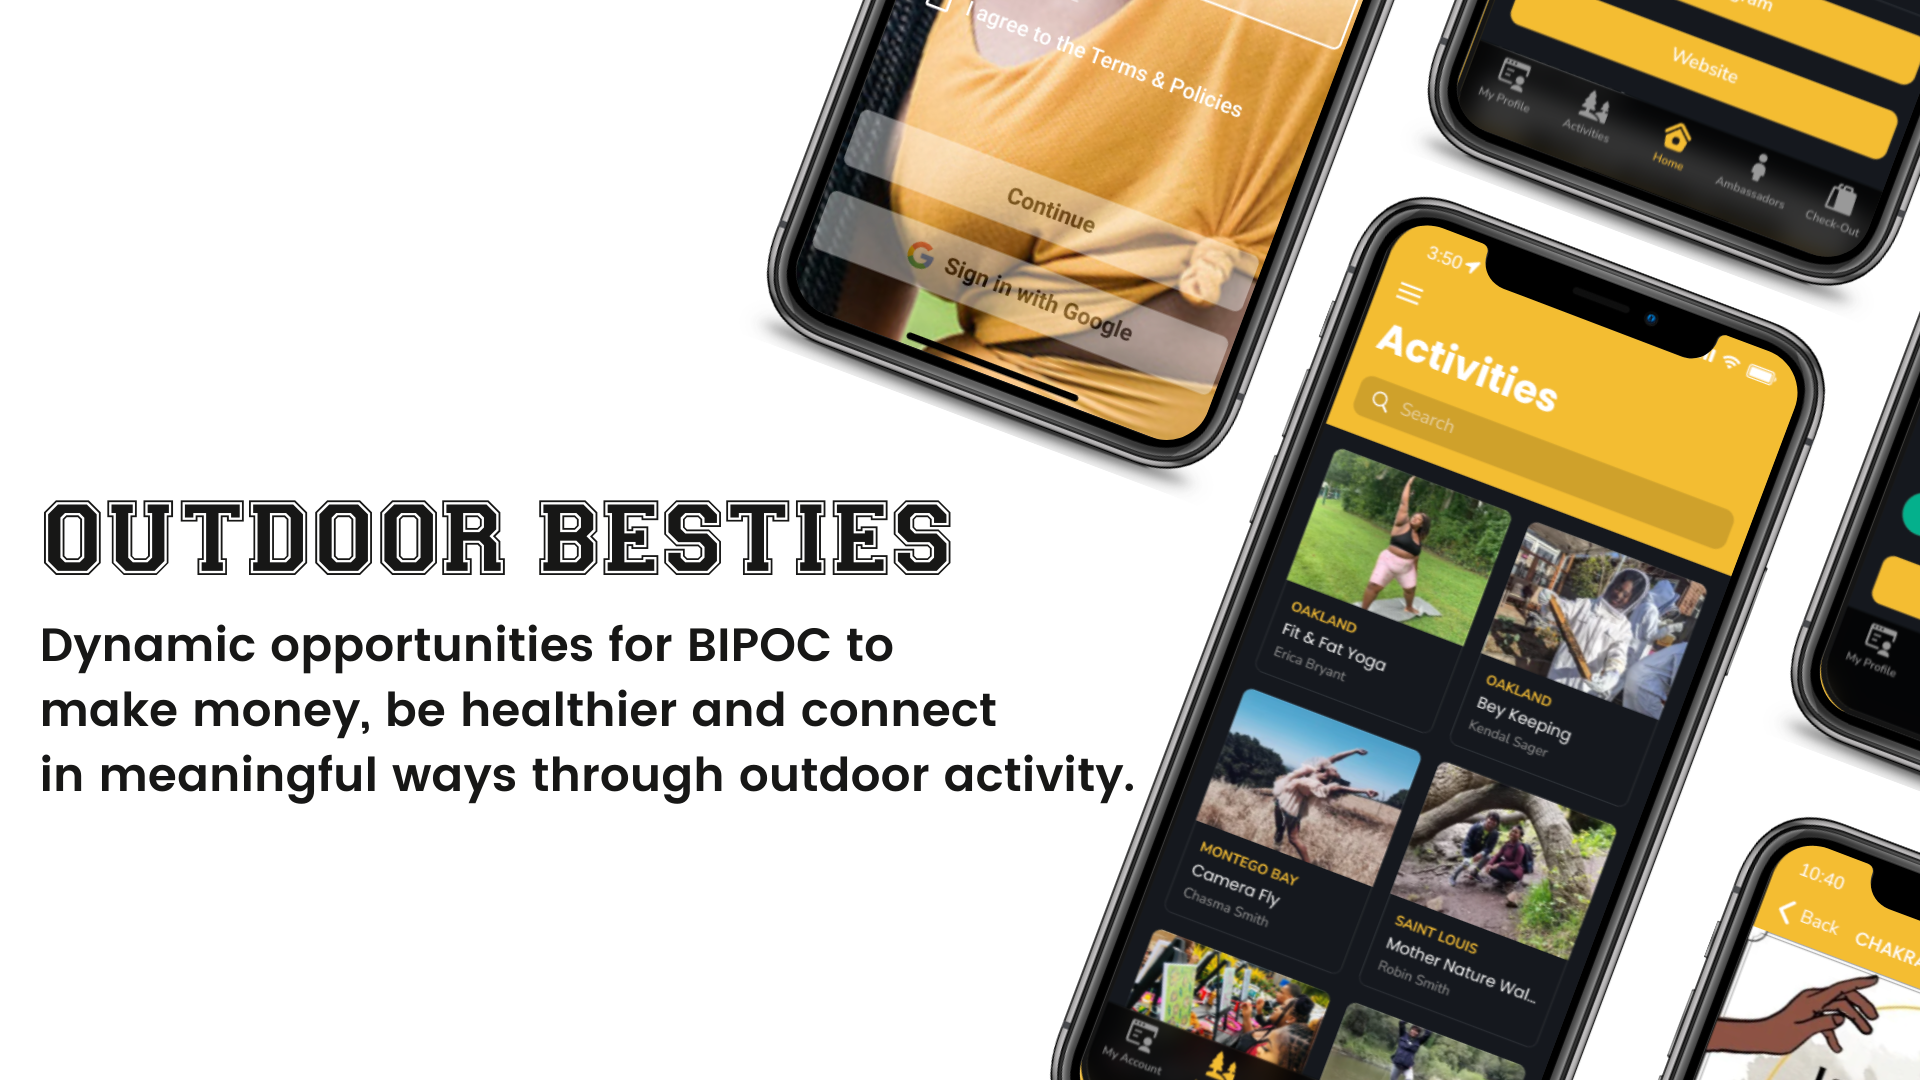 multiple images of cell phones showing various features of the Outdoor Besties App